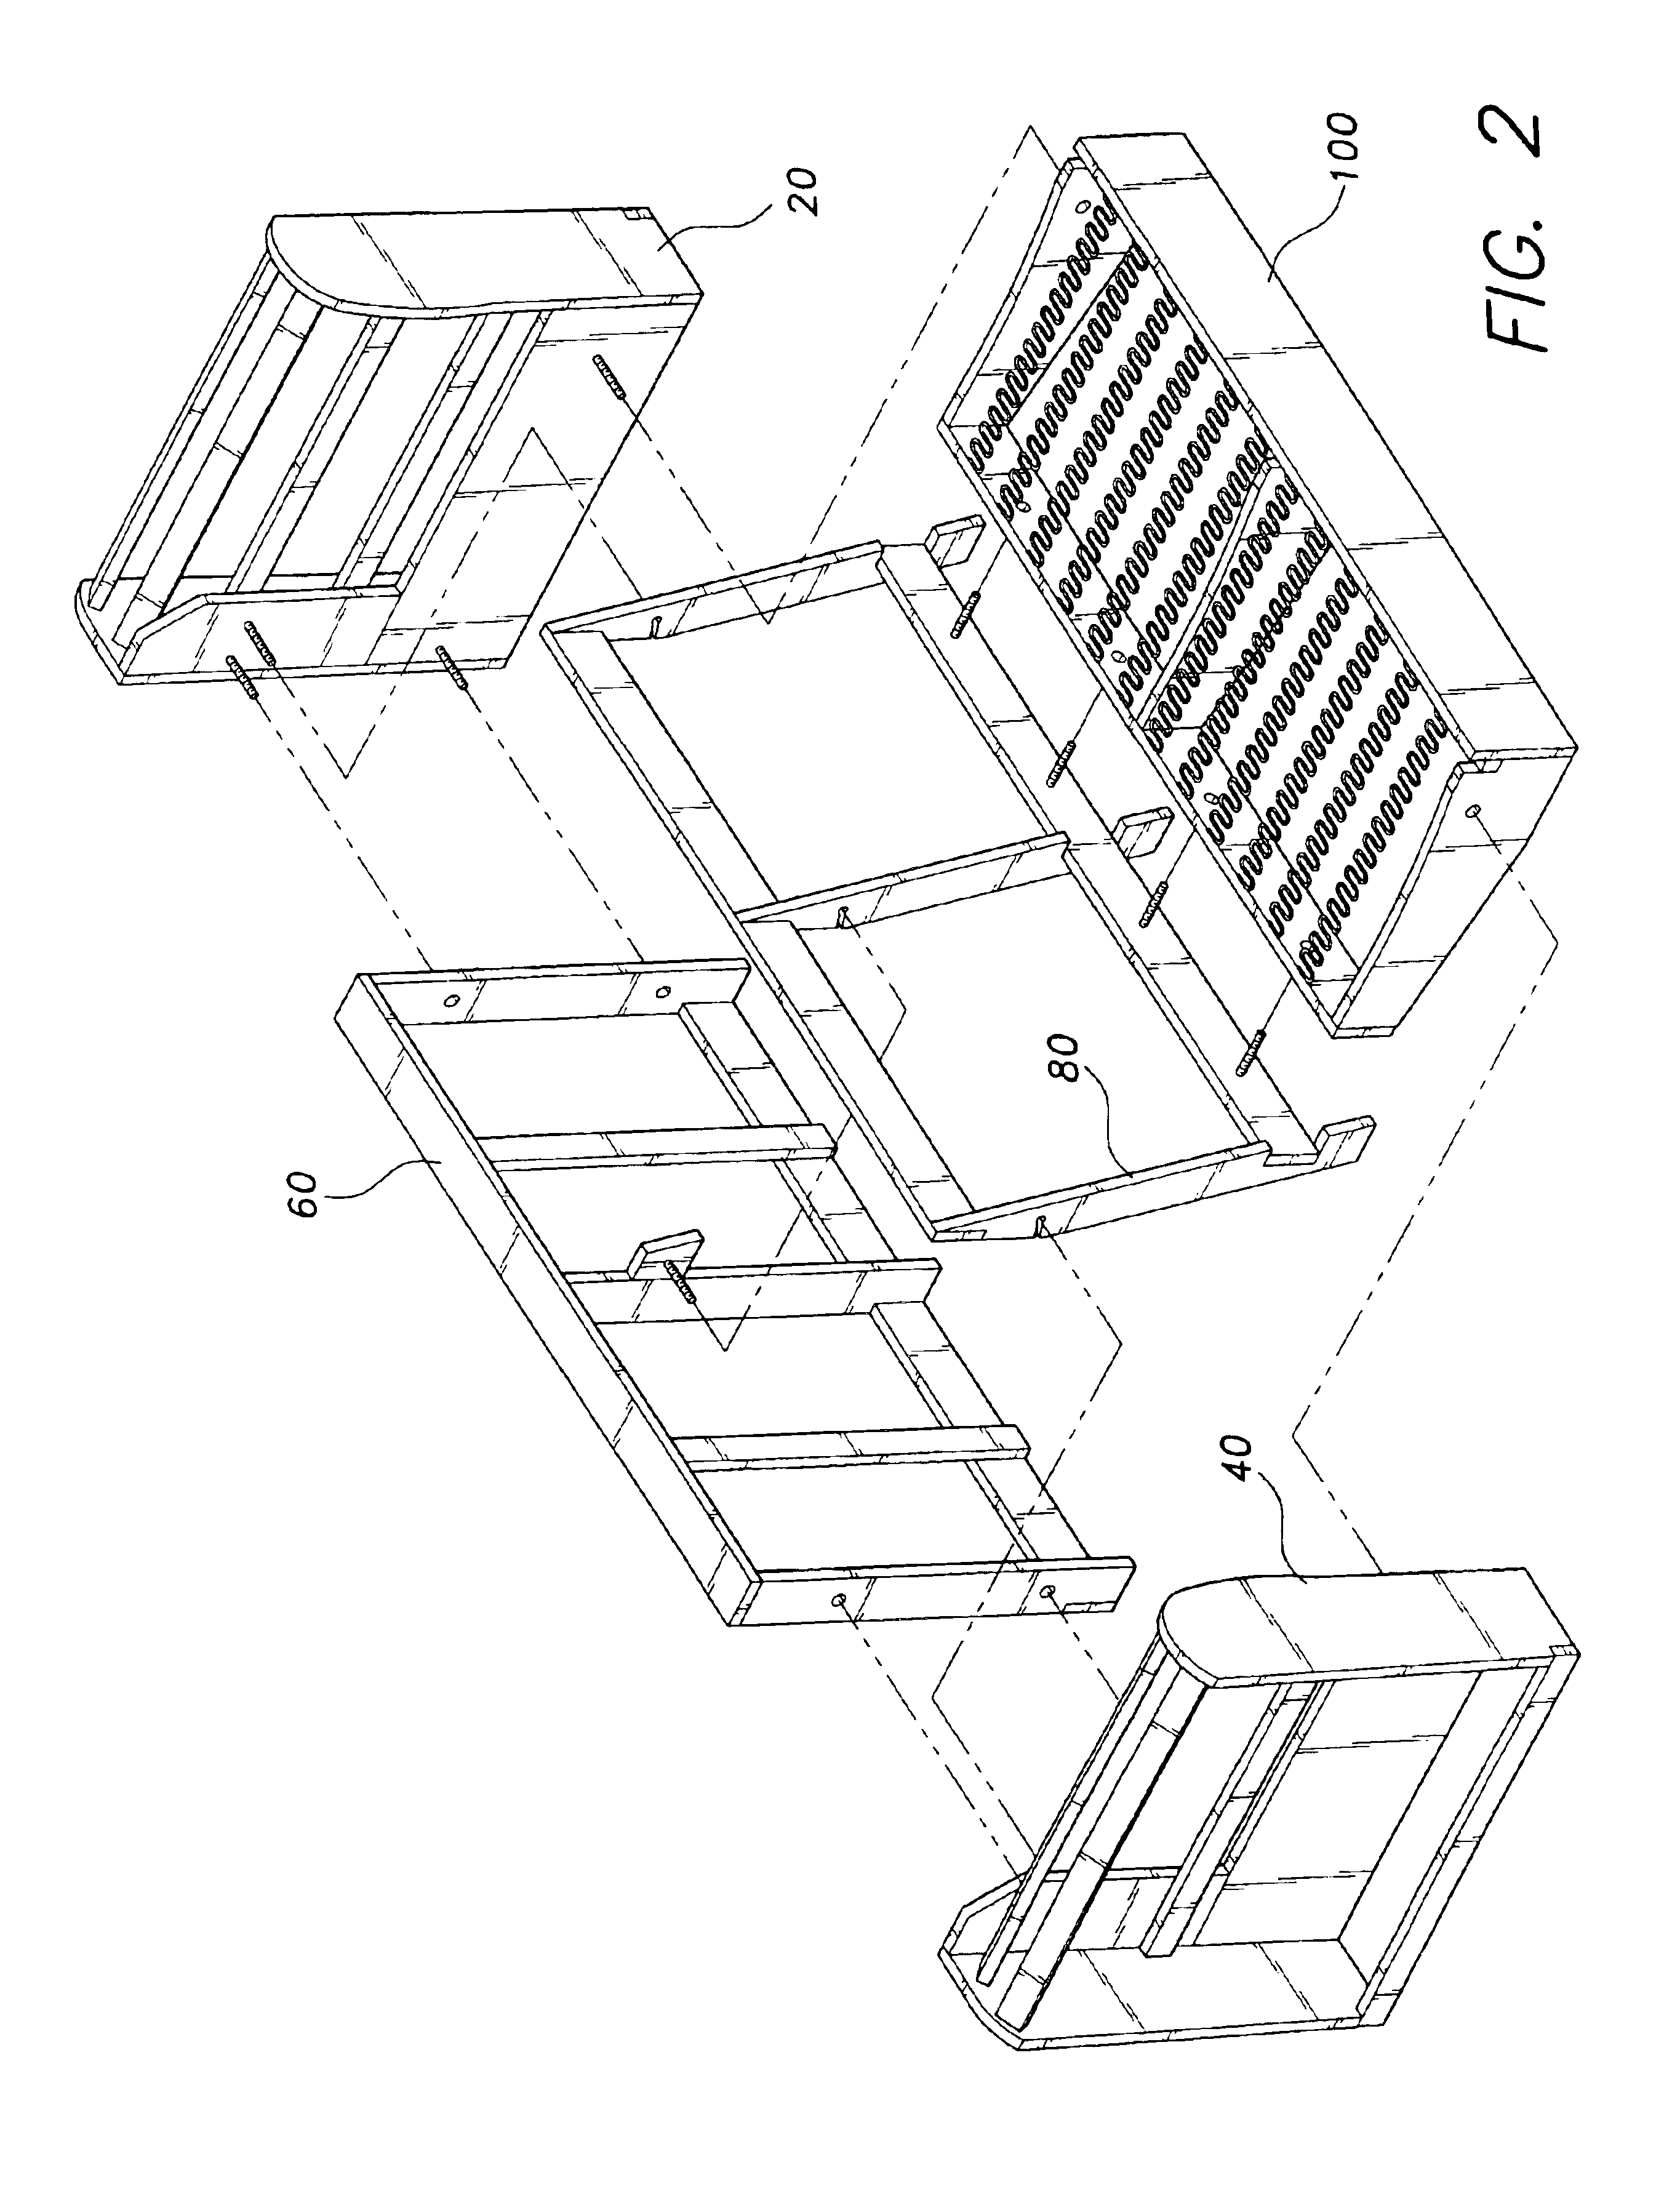 Five-part furniture frame and method of assembly